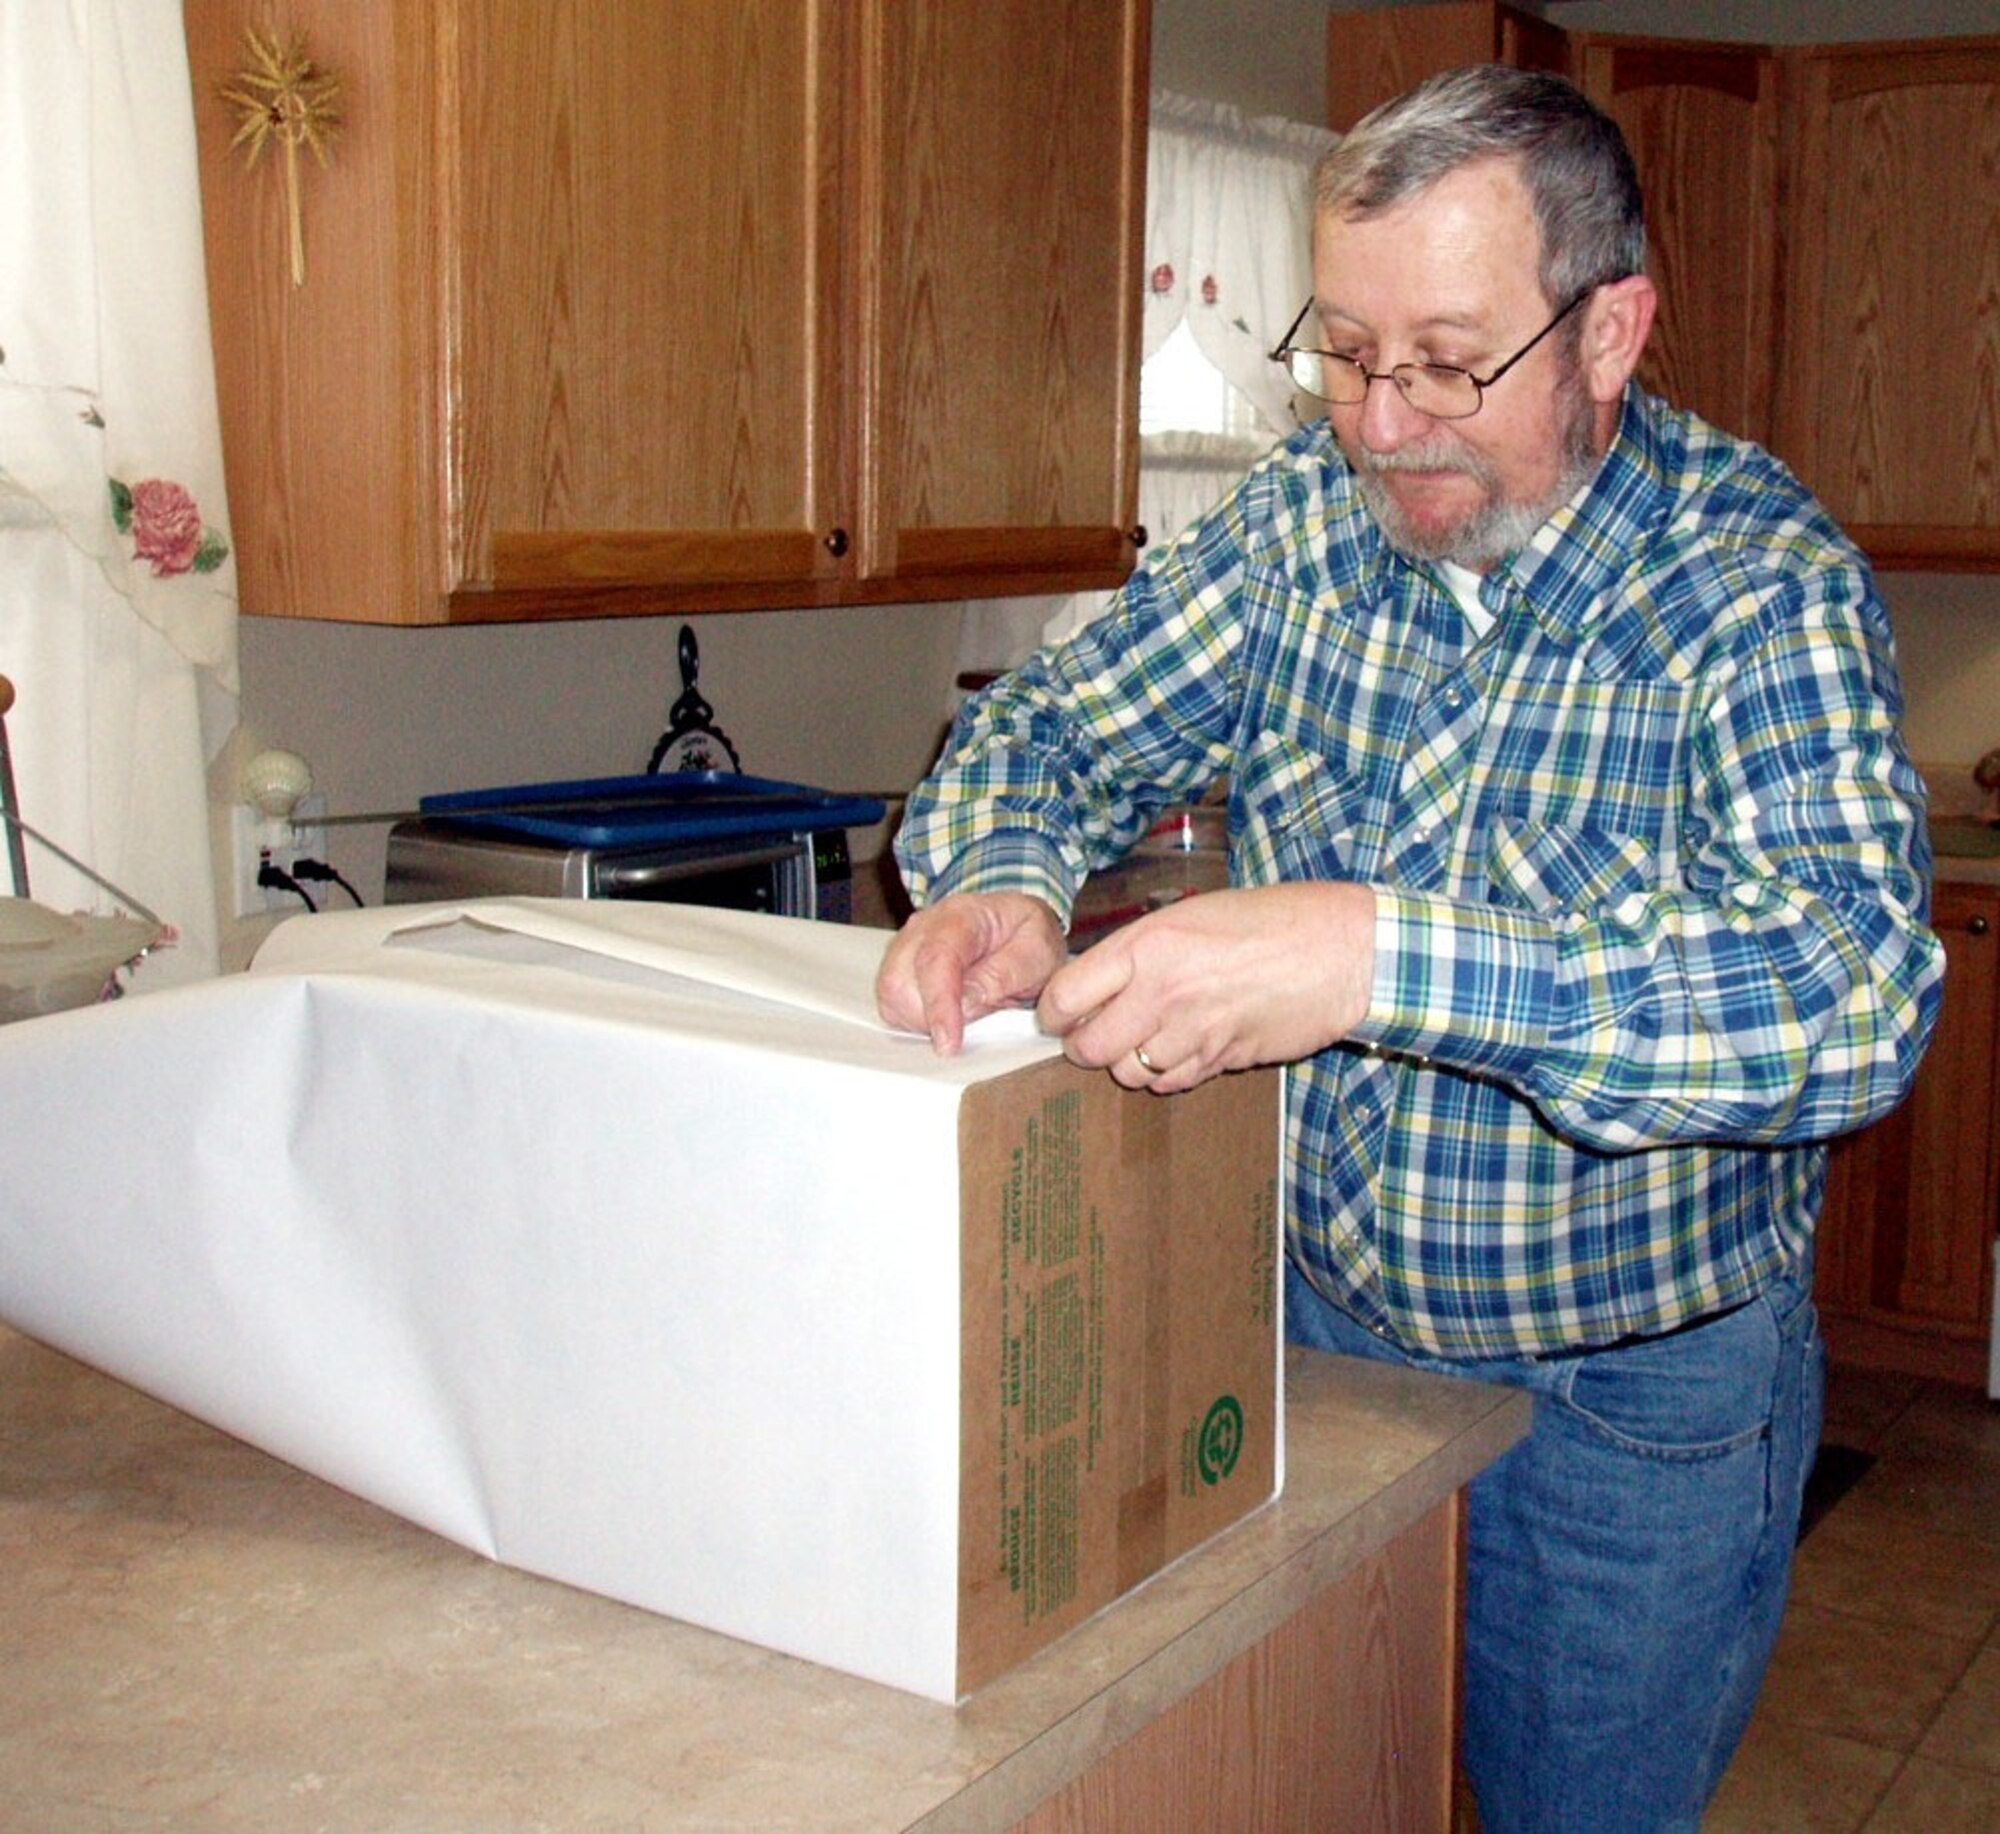 Denis Miller works on making a drop box for the Cell Phones for Soldiers program. On behalf of the Malmstrom Retirees Council, he is spearheading the cell phone donation project on base and in Great Falls. (Photo by Gloria Miller)